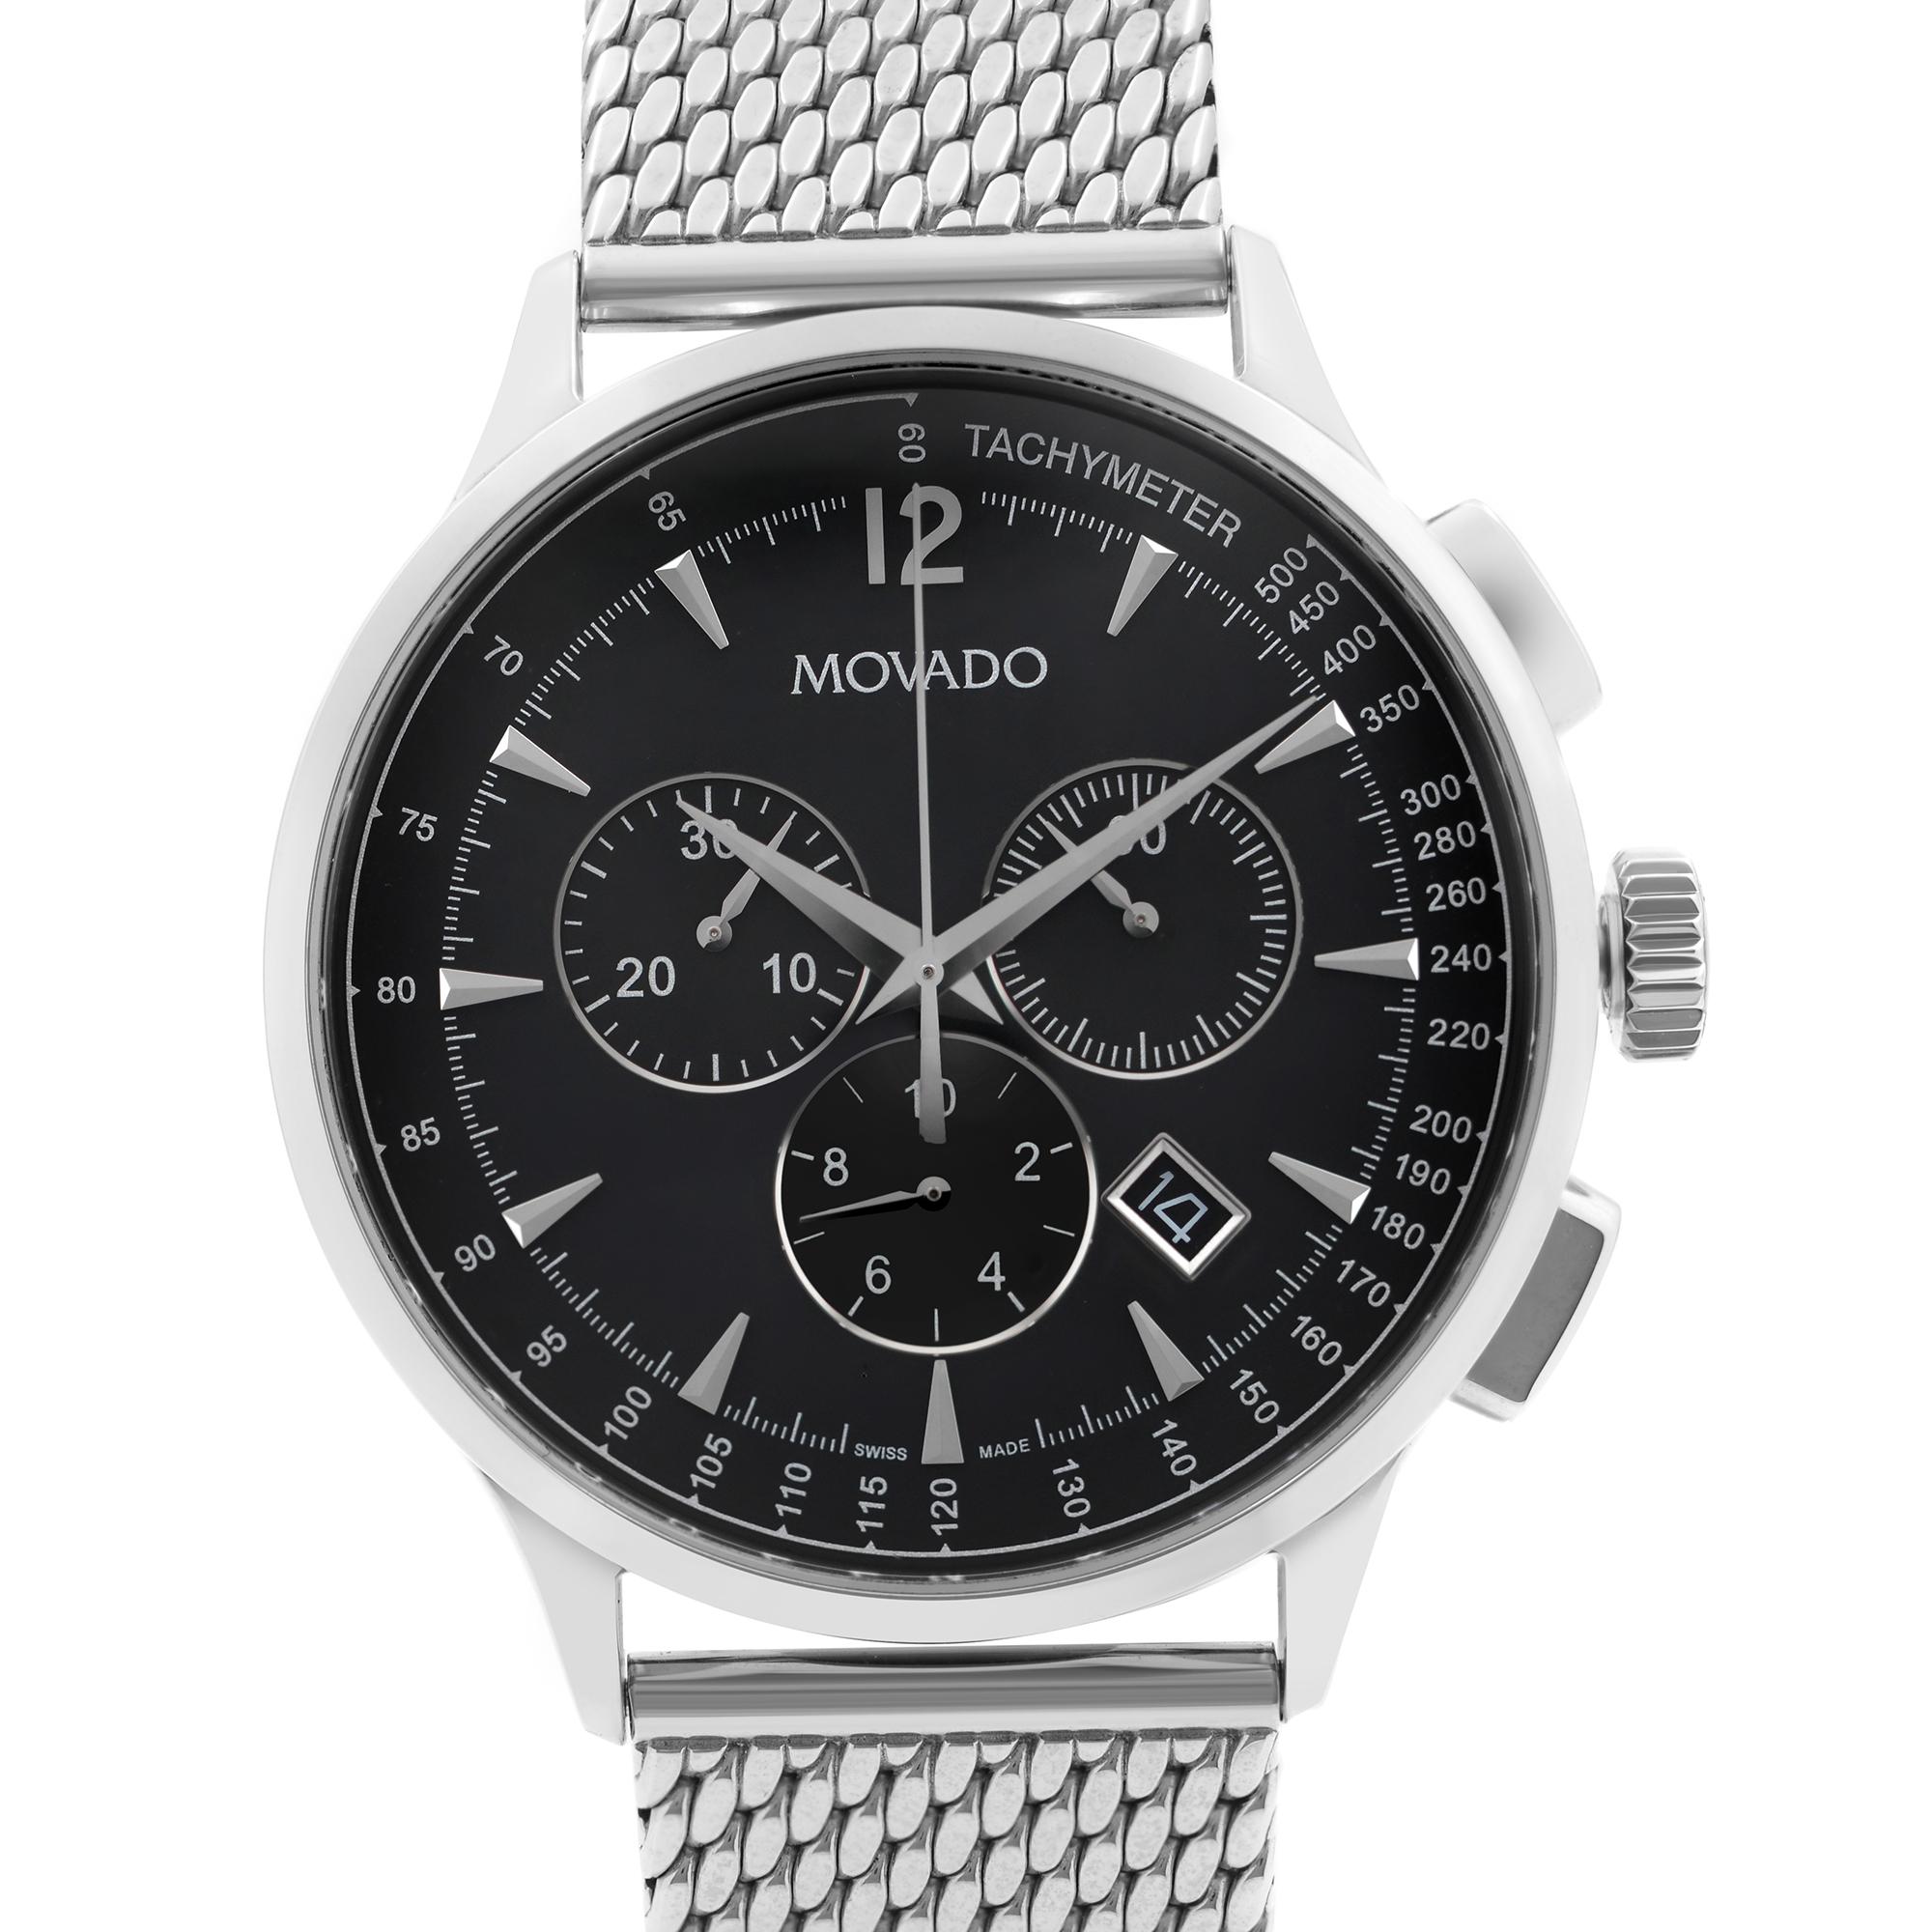 Store Display Model Movado Circa Chronograph Stainless Steel Black Dial Quartz Men's Watch 0606803. This Beautiful Timepiece Features: Stainless Steel Case, Bezel and Mesh Bracelet, Black Dial with Silver-Tone Hands, and Index Hour Markers. Original